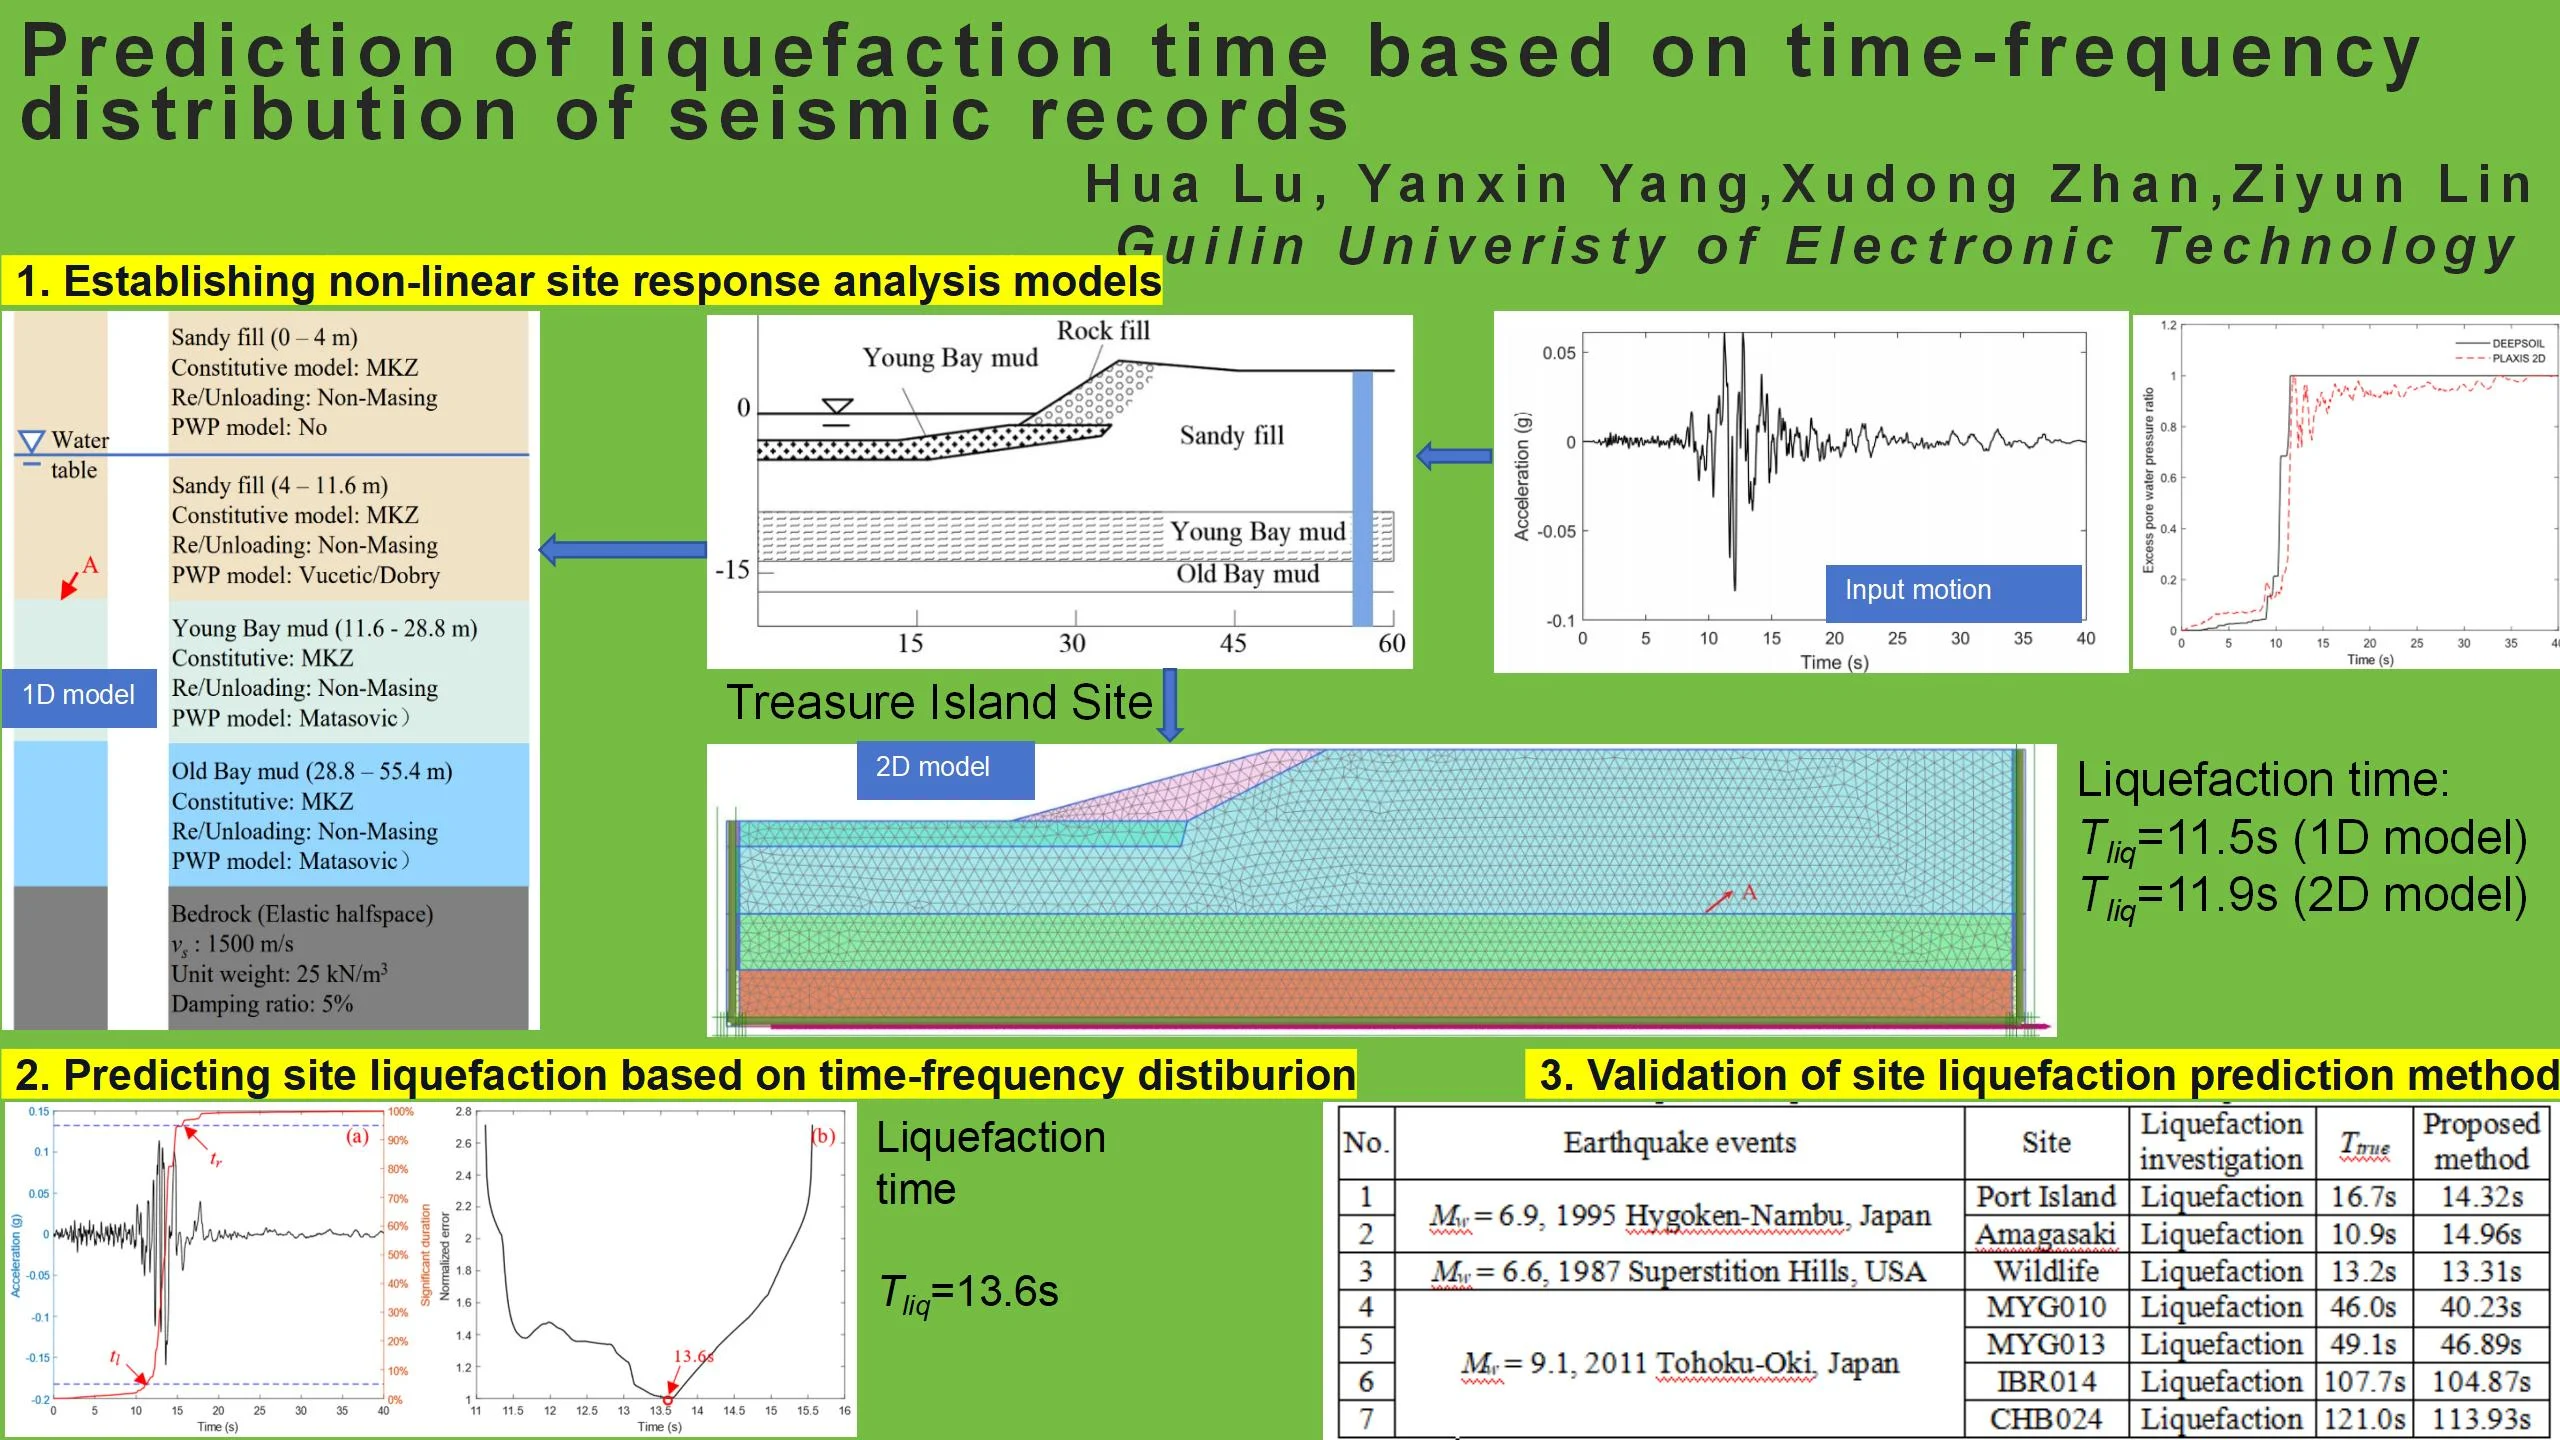 Prediction of liquefaction time based on time-frequency distribution of seismic records